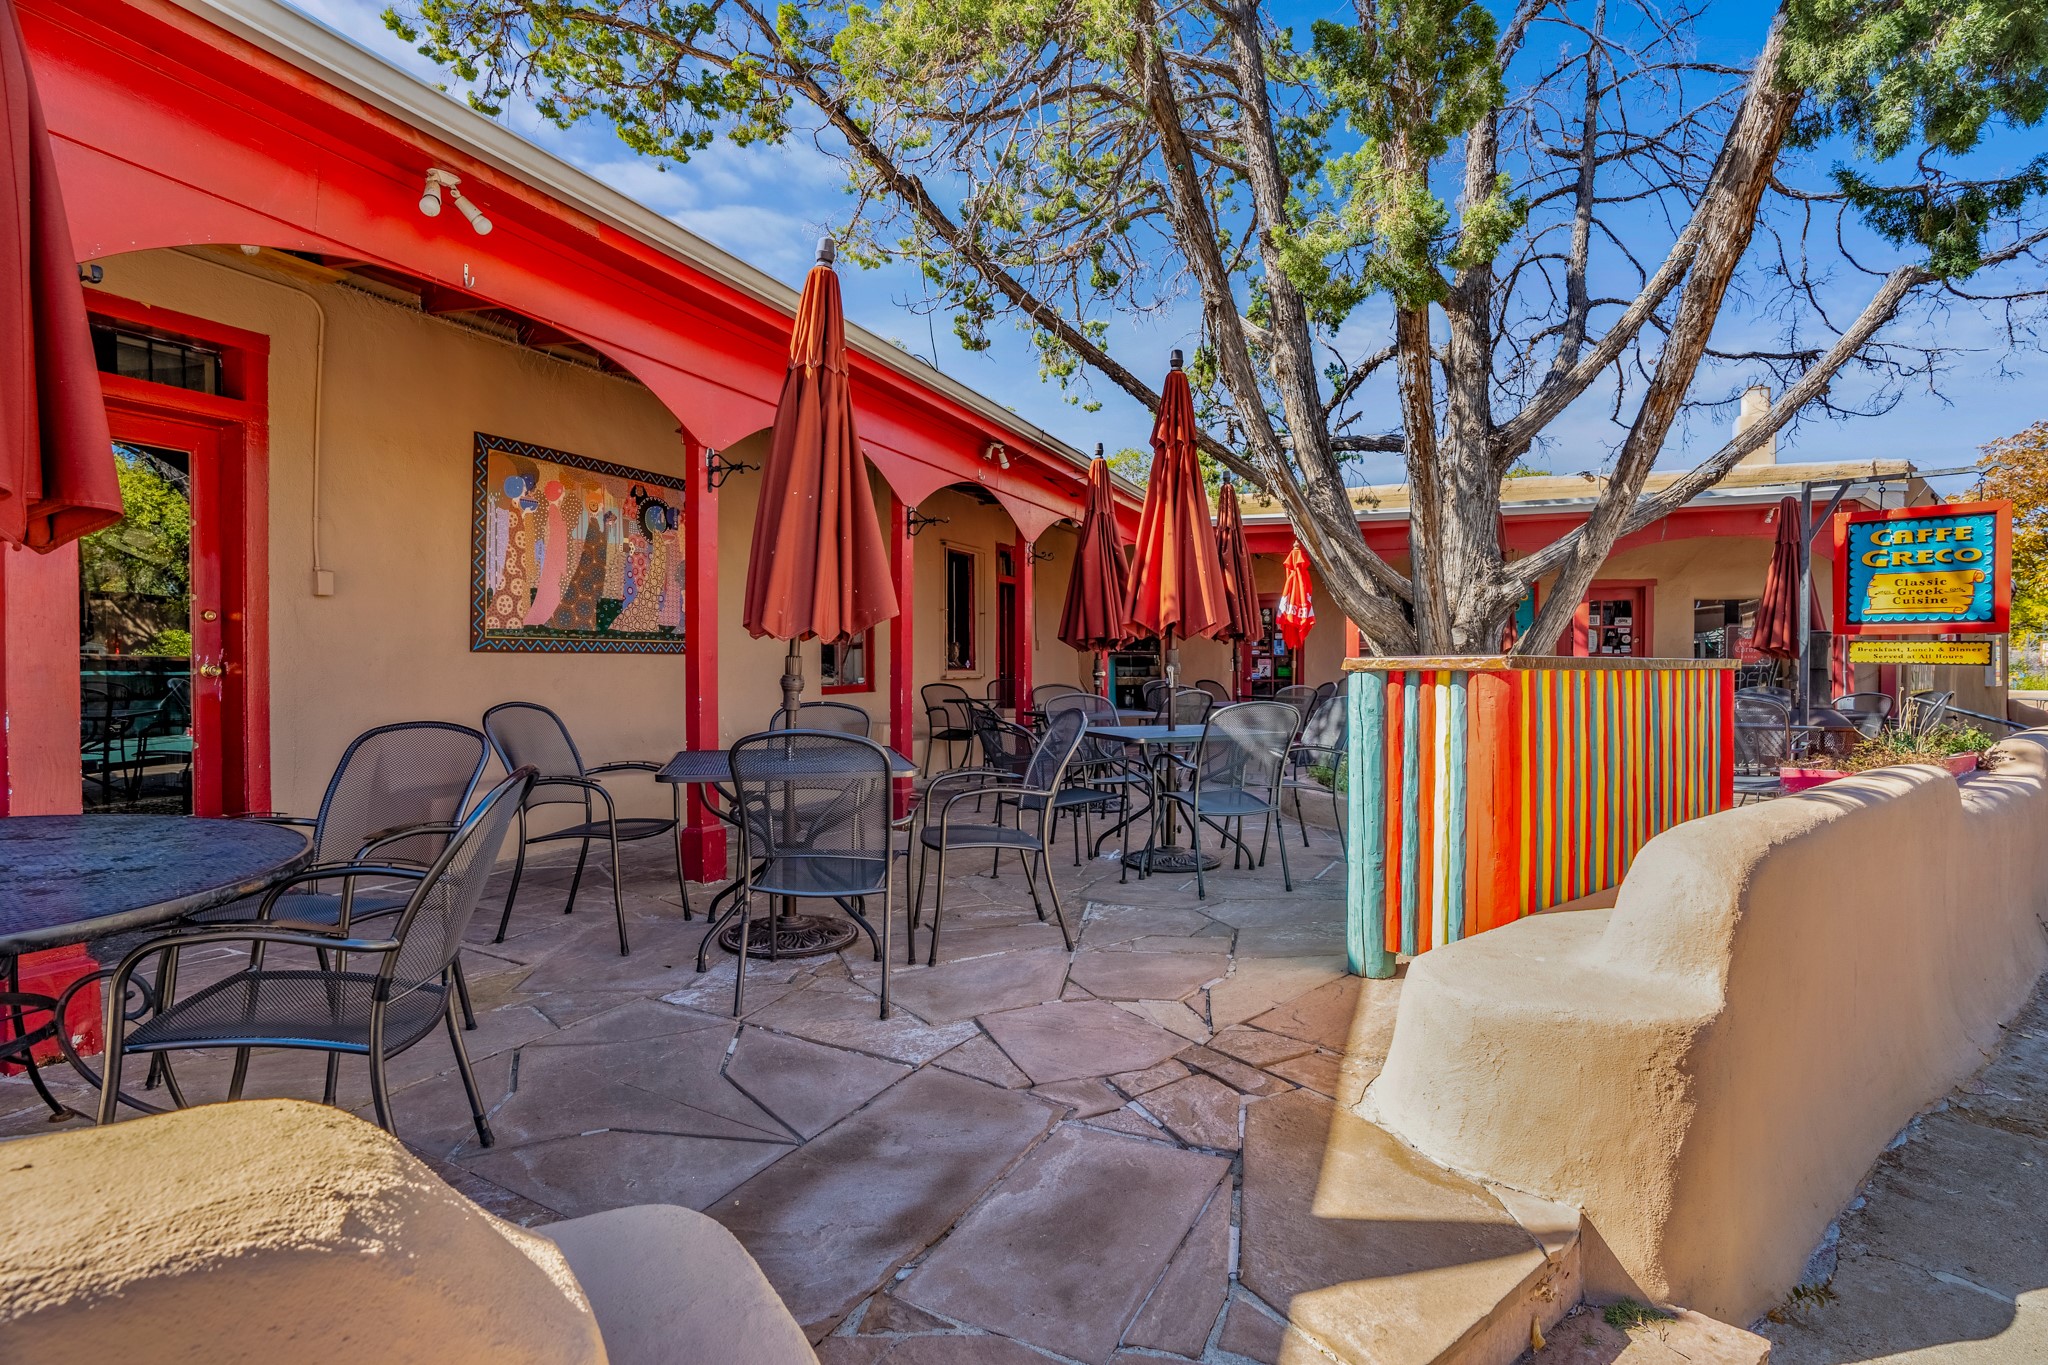 233 CANYON Road, Santa Fe, New Mexico 87501, 3 Bedrooms Bedrooms, ,8 BathroomsBathrooms,Residential,For Sale,233 CANYON Road,202341475